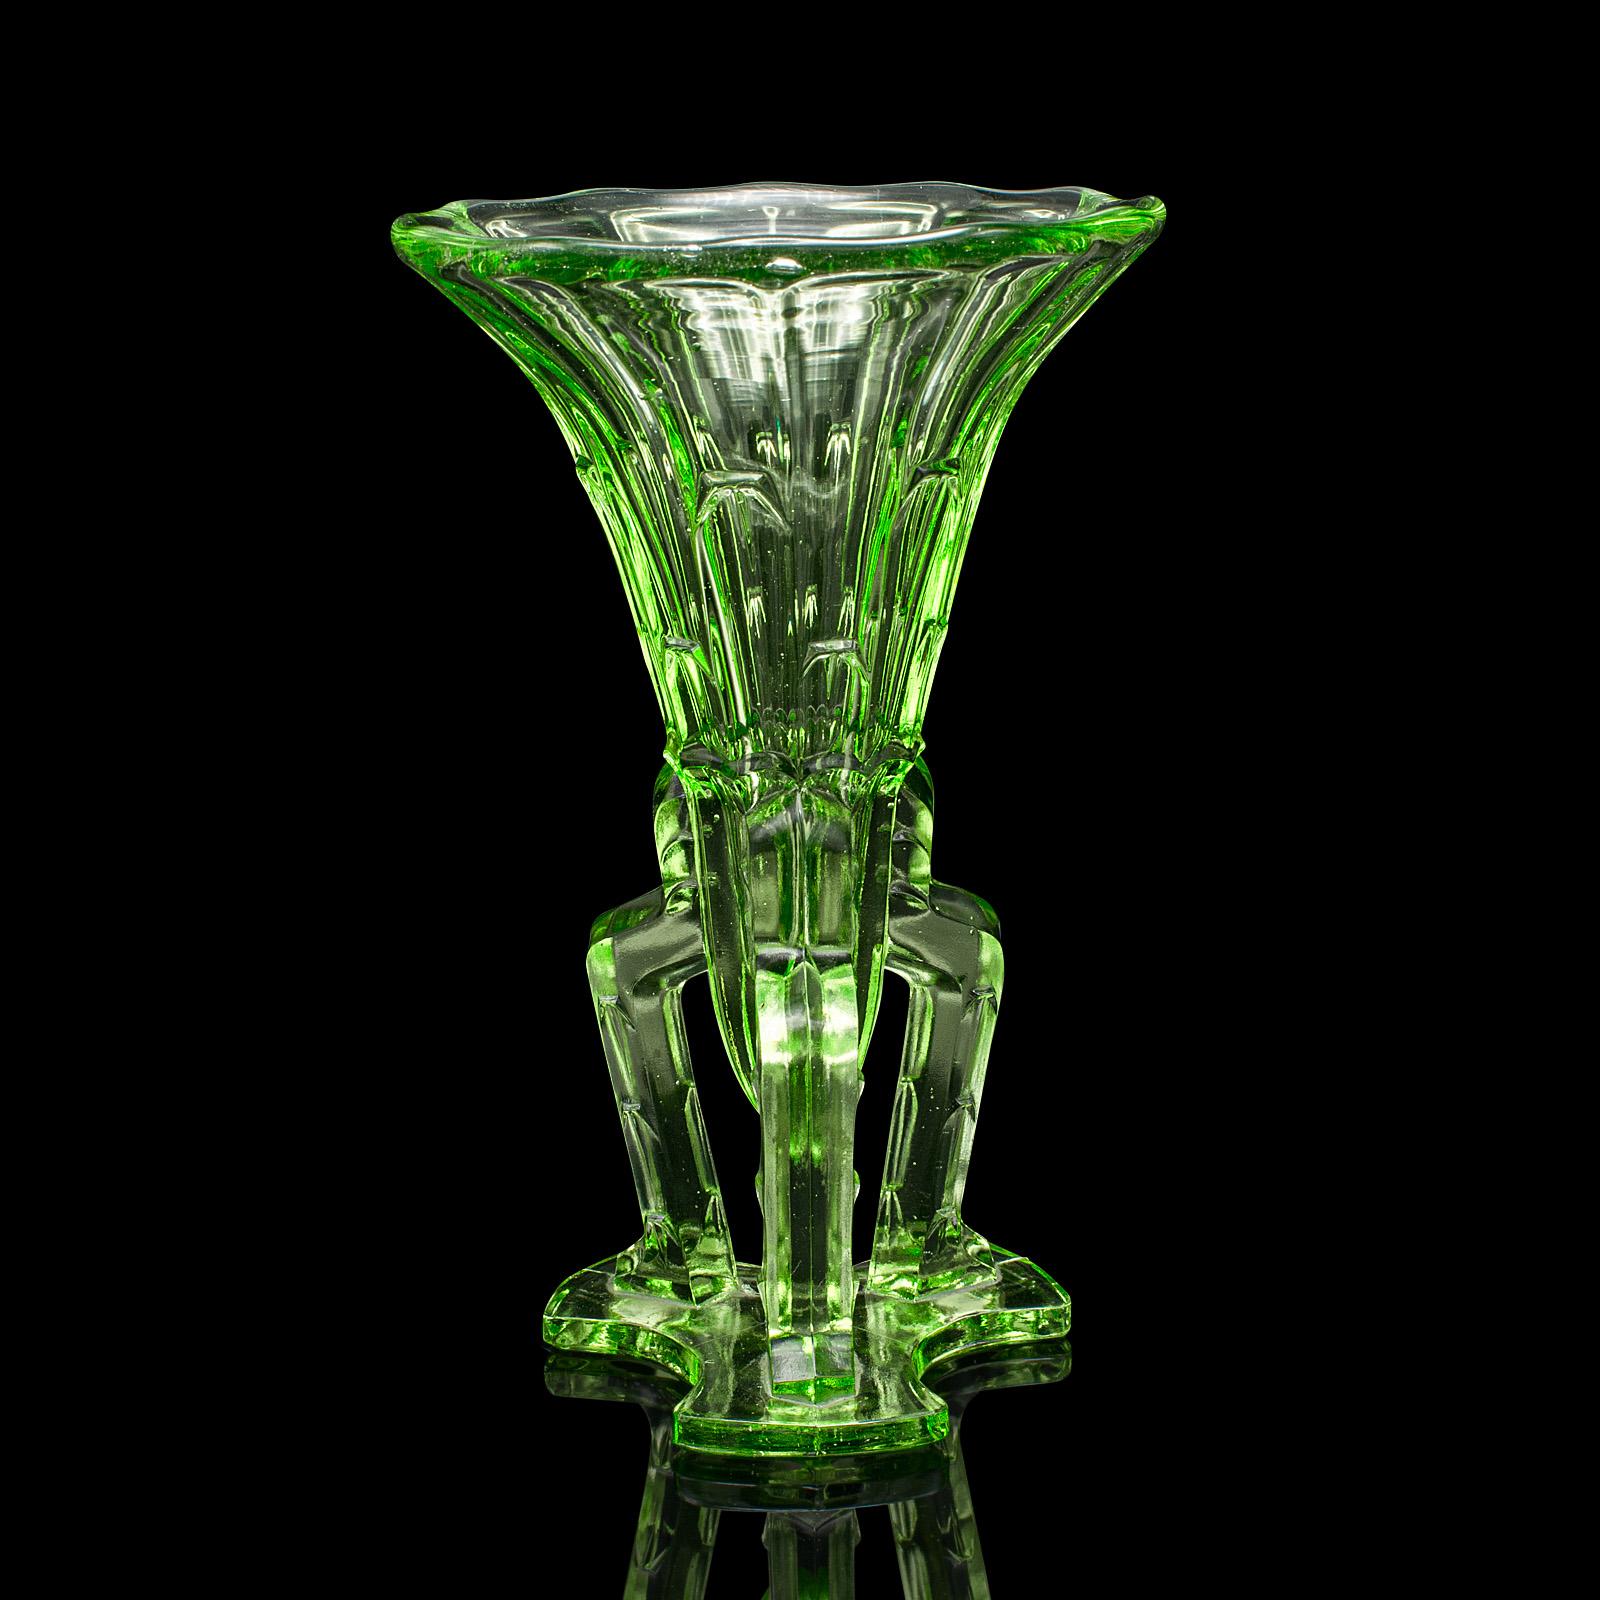 Small Vintage Rocket Vase, English Art Glass, Posy, Flower, Art Deco, Circa 1930 In Good Condition For Sale In Hele, Devon, GB